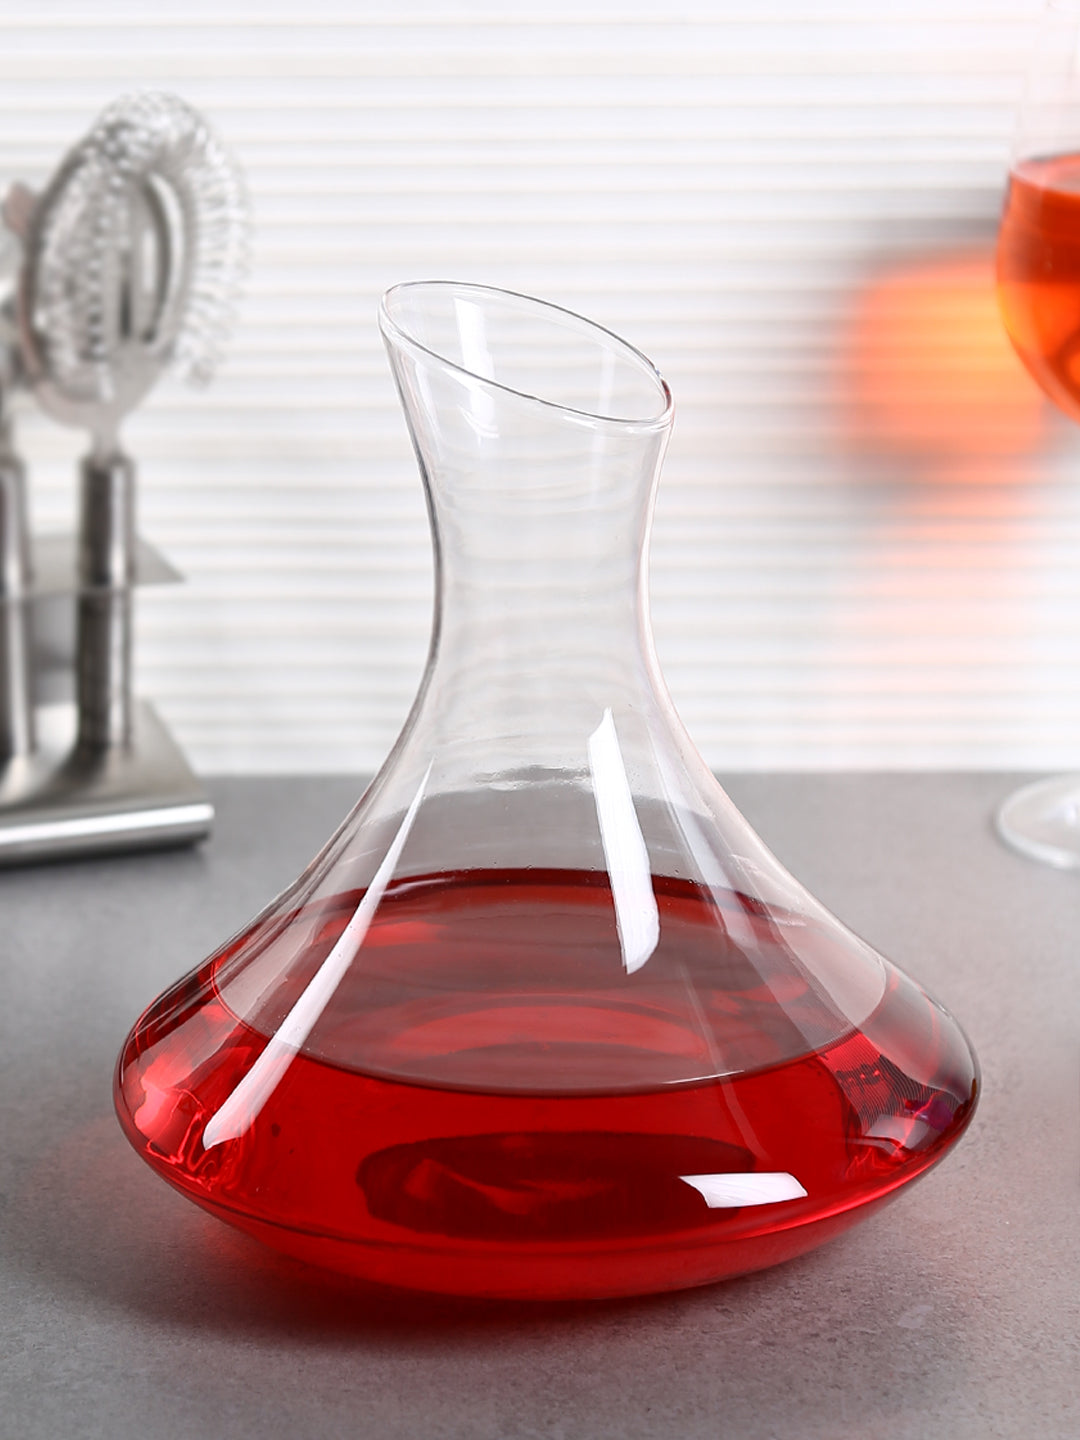 Crafted with precision and elegance, this decanter enhances wine flavors.